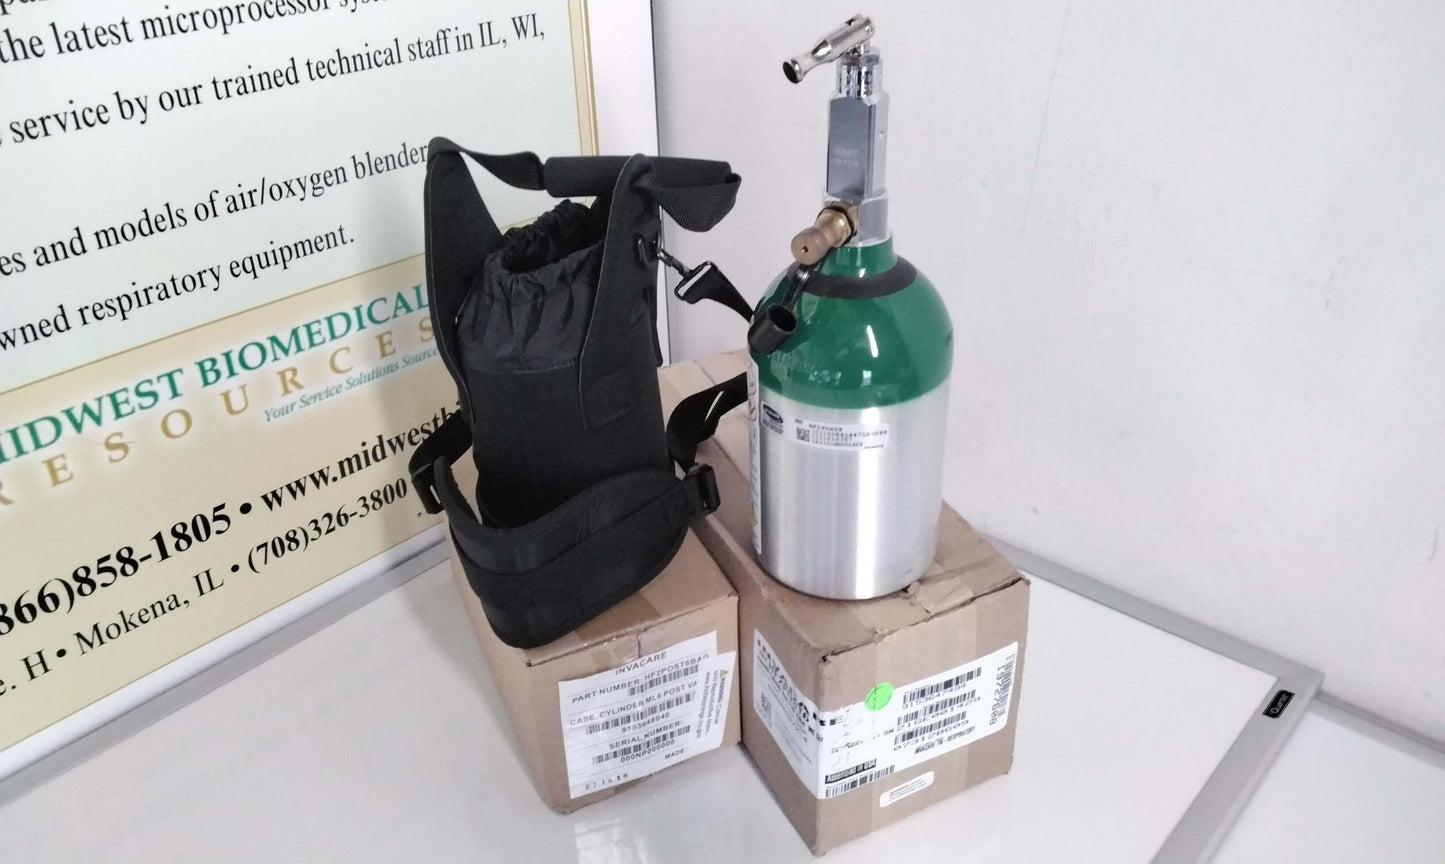 NEW Invacare ML6 Post Valve Cylinder and Carrying Bag HF2POST6KIT with Free Shipping and Warranty - MBR Medicals